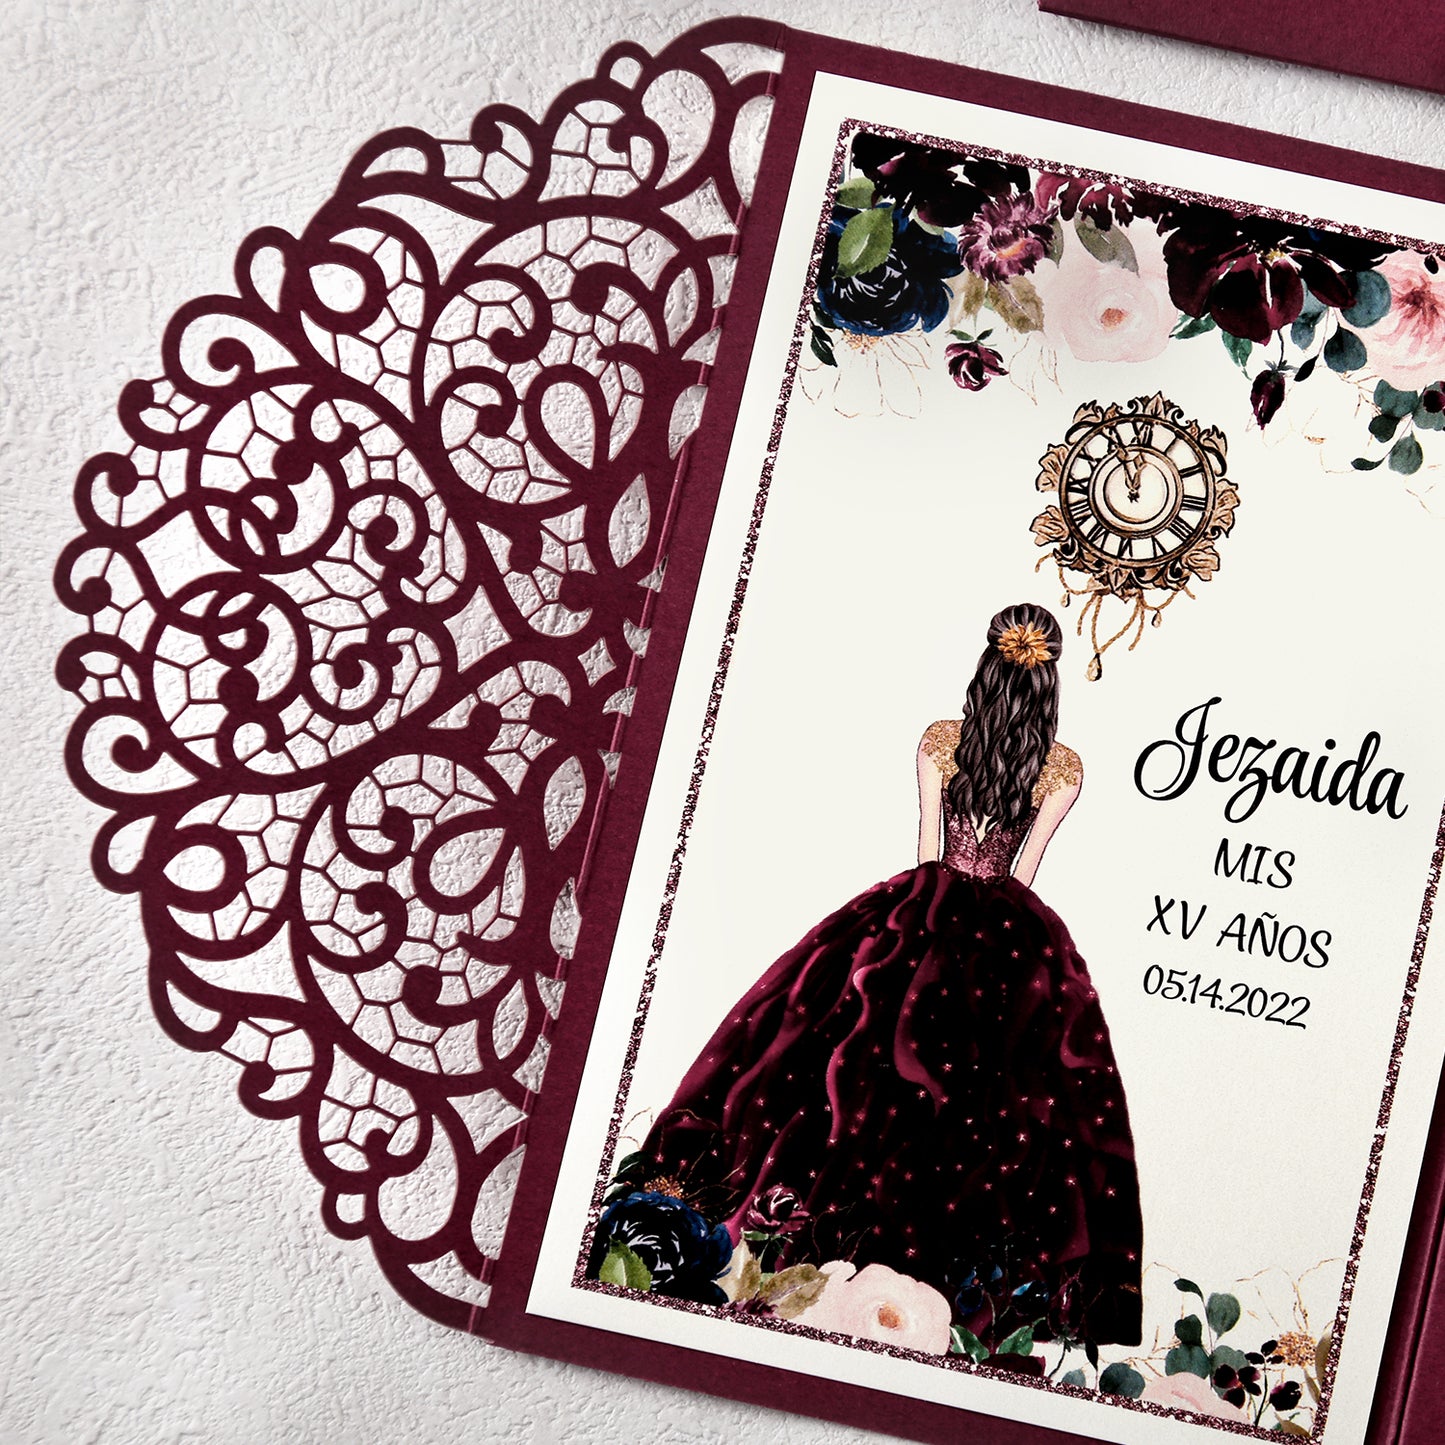 4.7 x7 inch Burgundy Laser Cut Hollow Rose Quinceanera Invitations Cards with Envelopes for Quinceanera Party